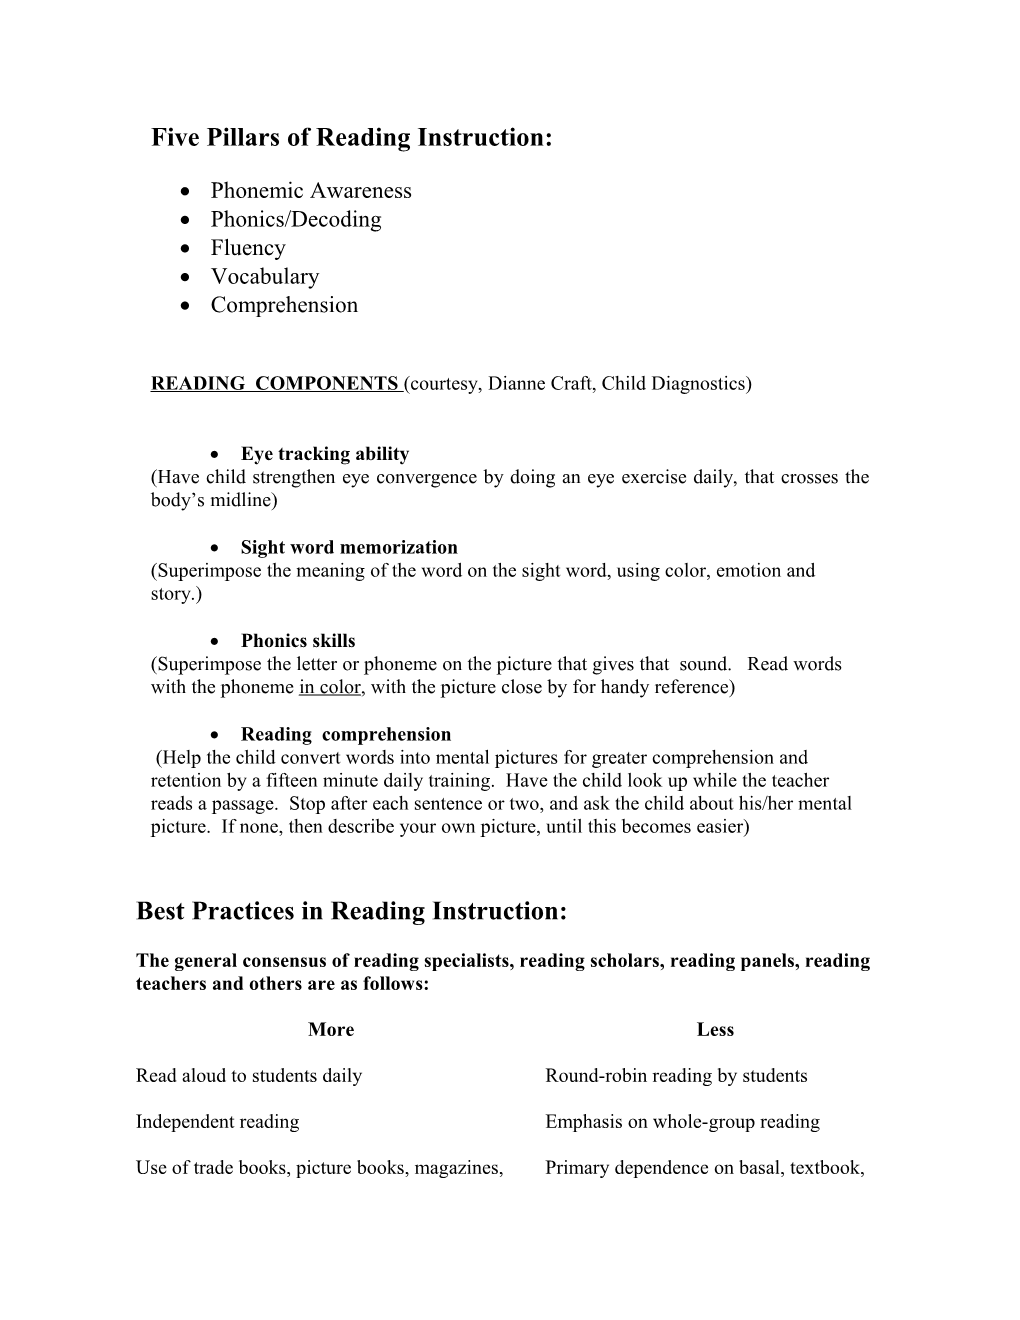 Best Practices in Reading Instruction